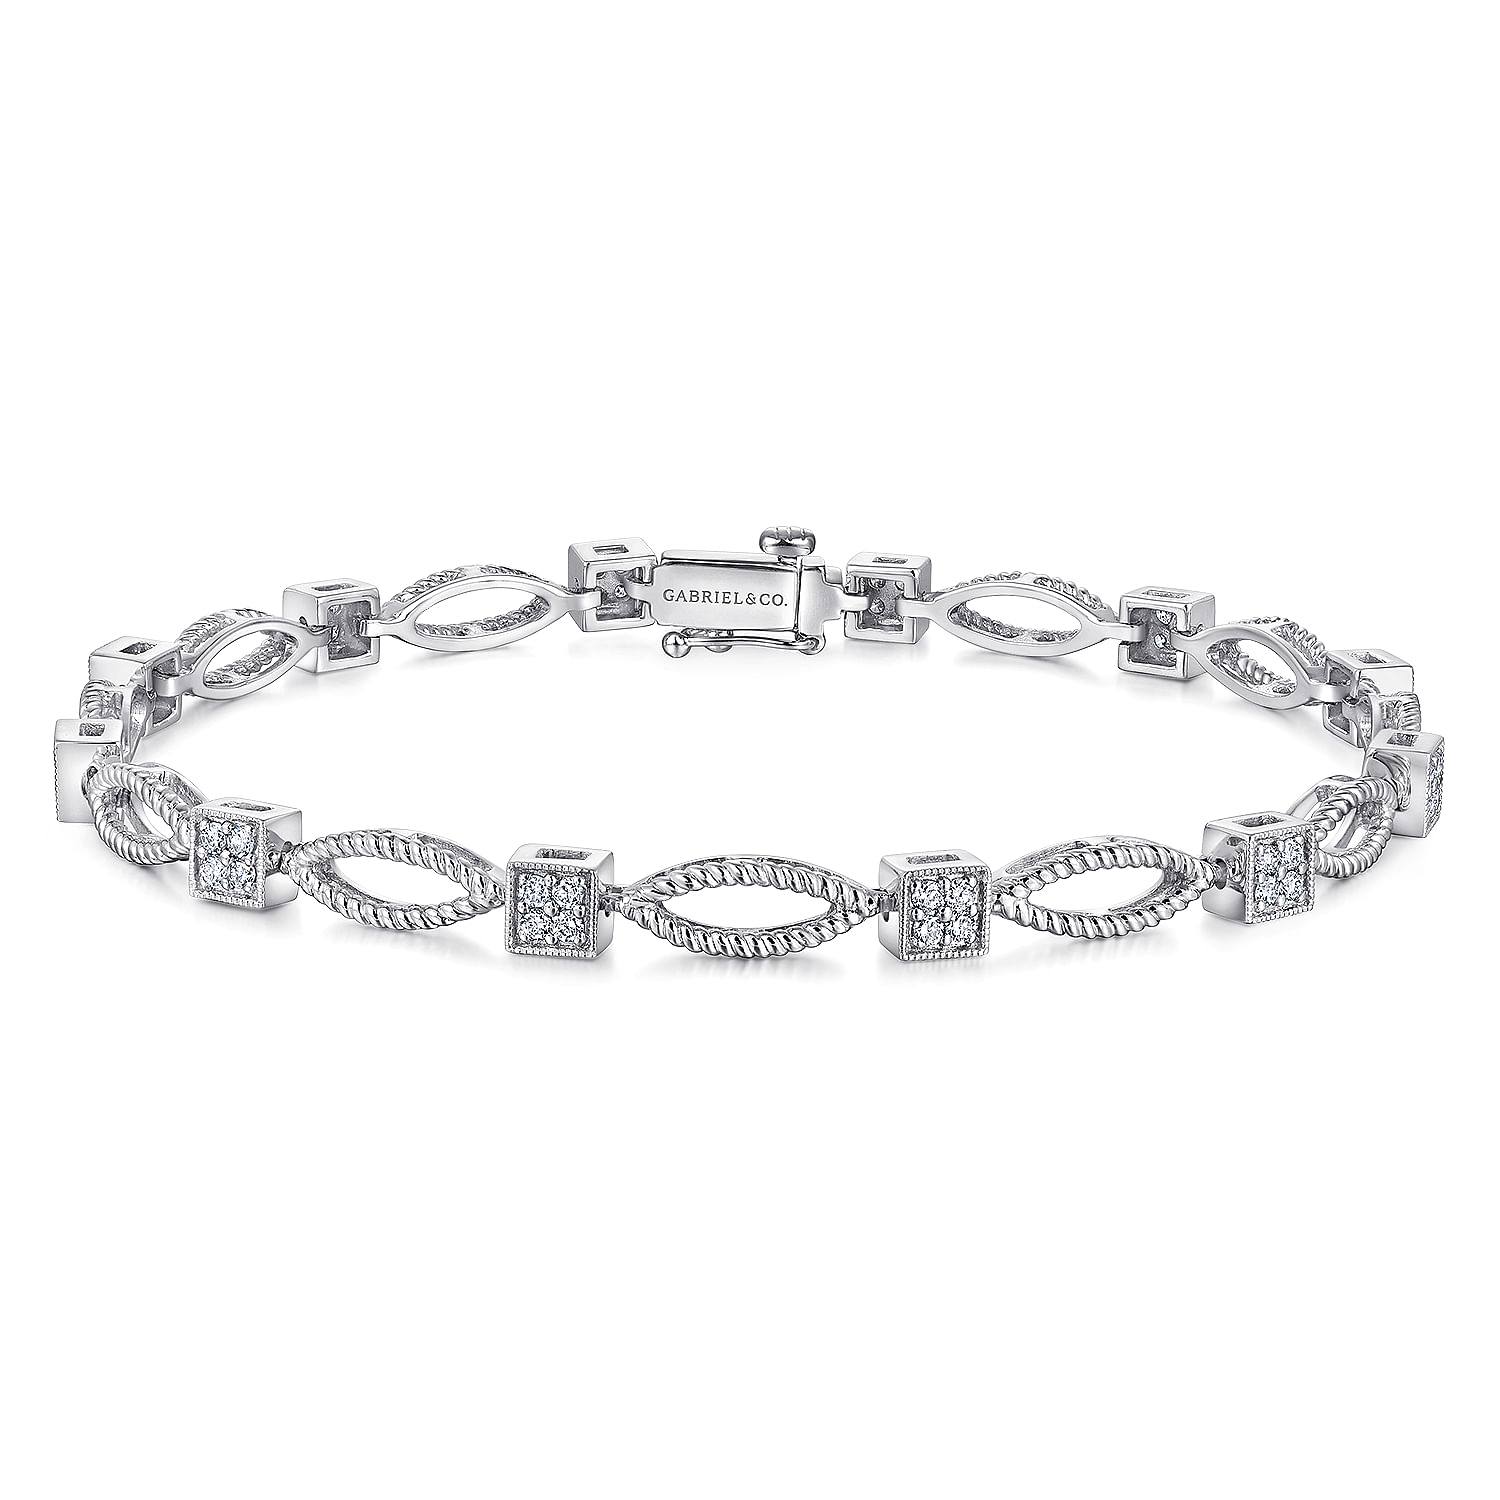 14K White Gold Twisted Rope Link Tennis Bracelet with Pavé Diamond Cube Spacers